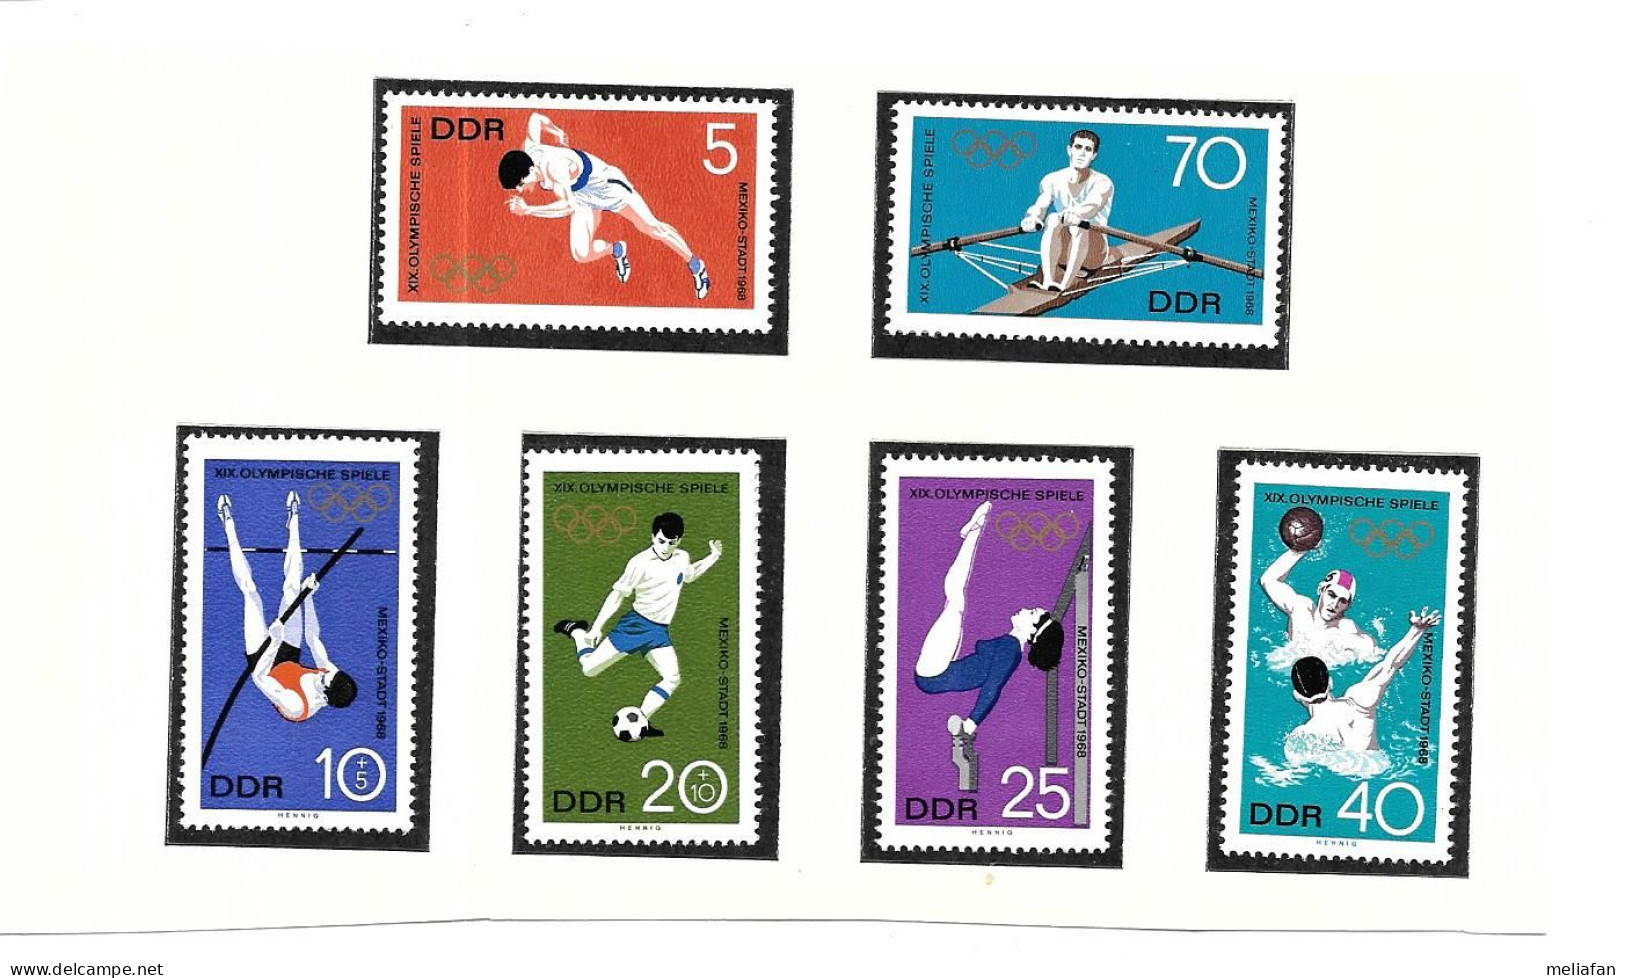 DF96 - TIMBRES POSTE DDR - JEUX OLYMPIQUES MEXICO - AVIRON - FOOTBALL - WATER POLO - GYMNASTIQUE - ATHLETISME - Estate 1968: Messico